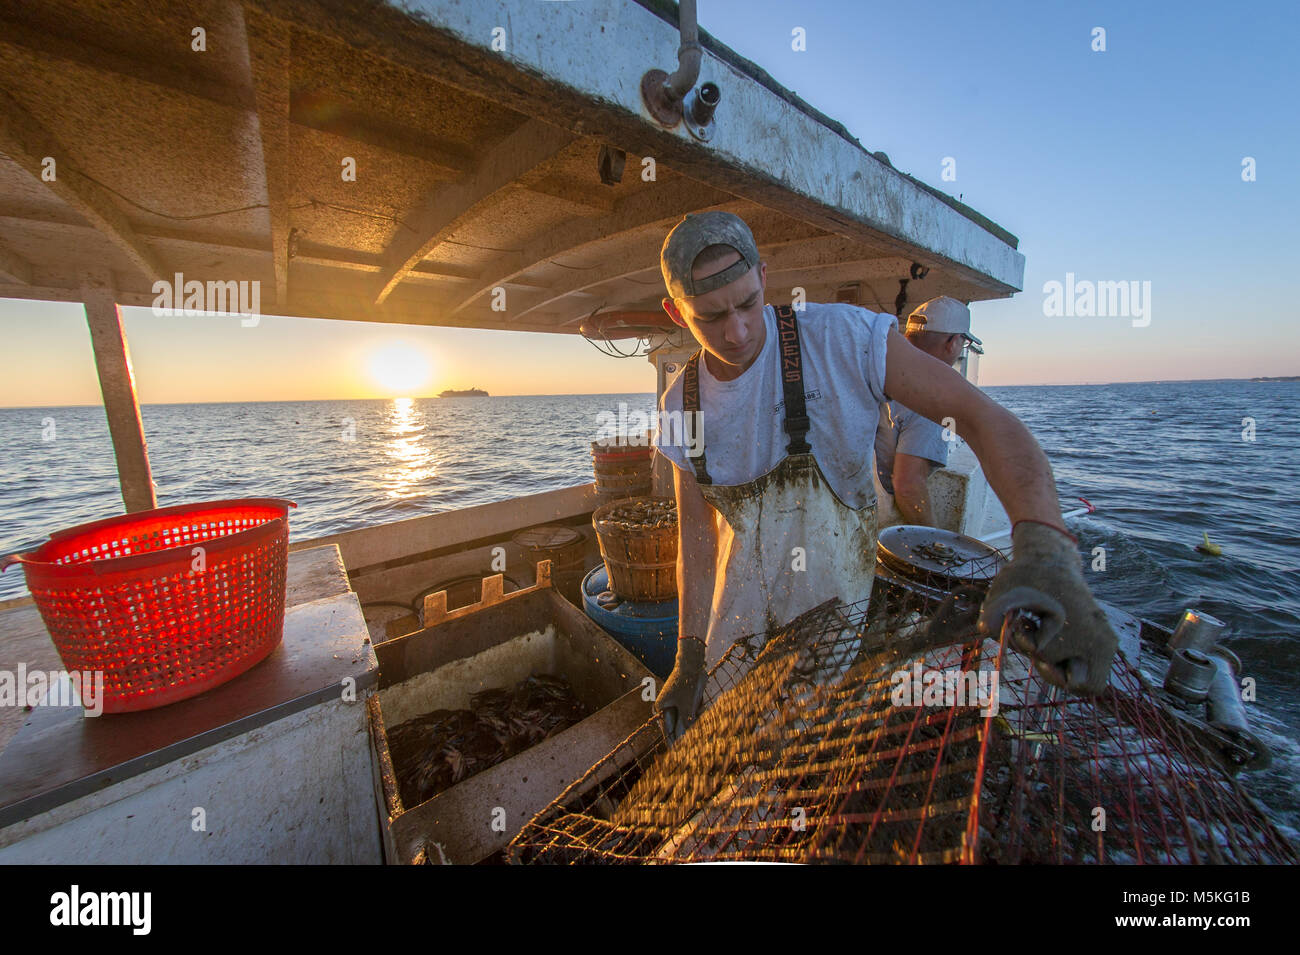 Young waterman pulls in crab trap from Chesapeake Bay as the sun rises in background, Dundalk, Maryland. Stock Photo